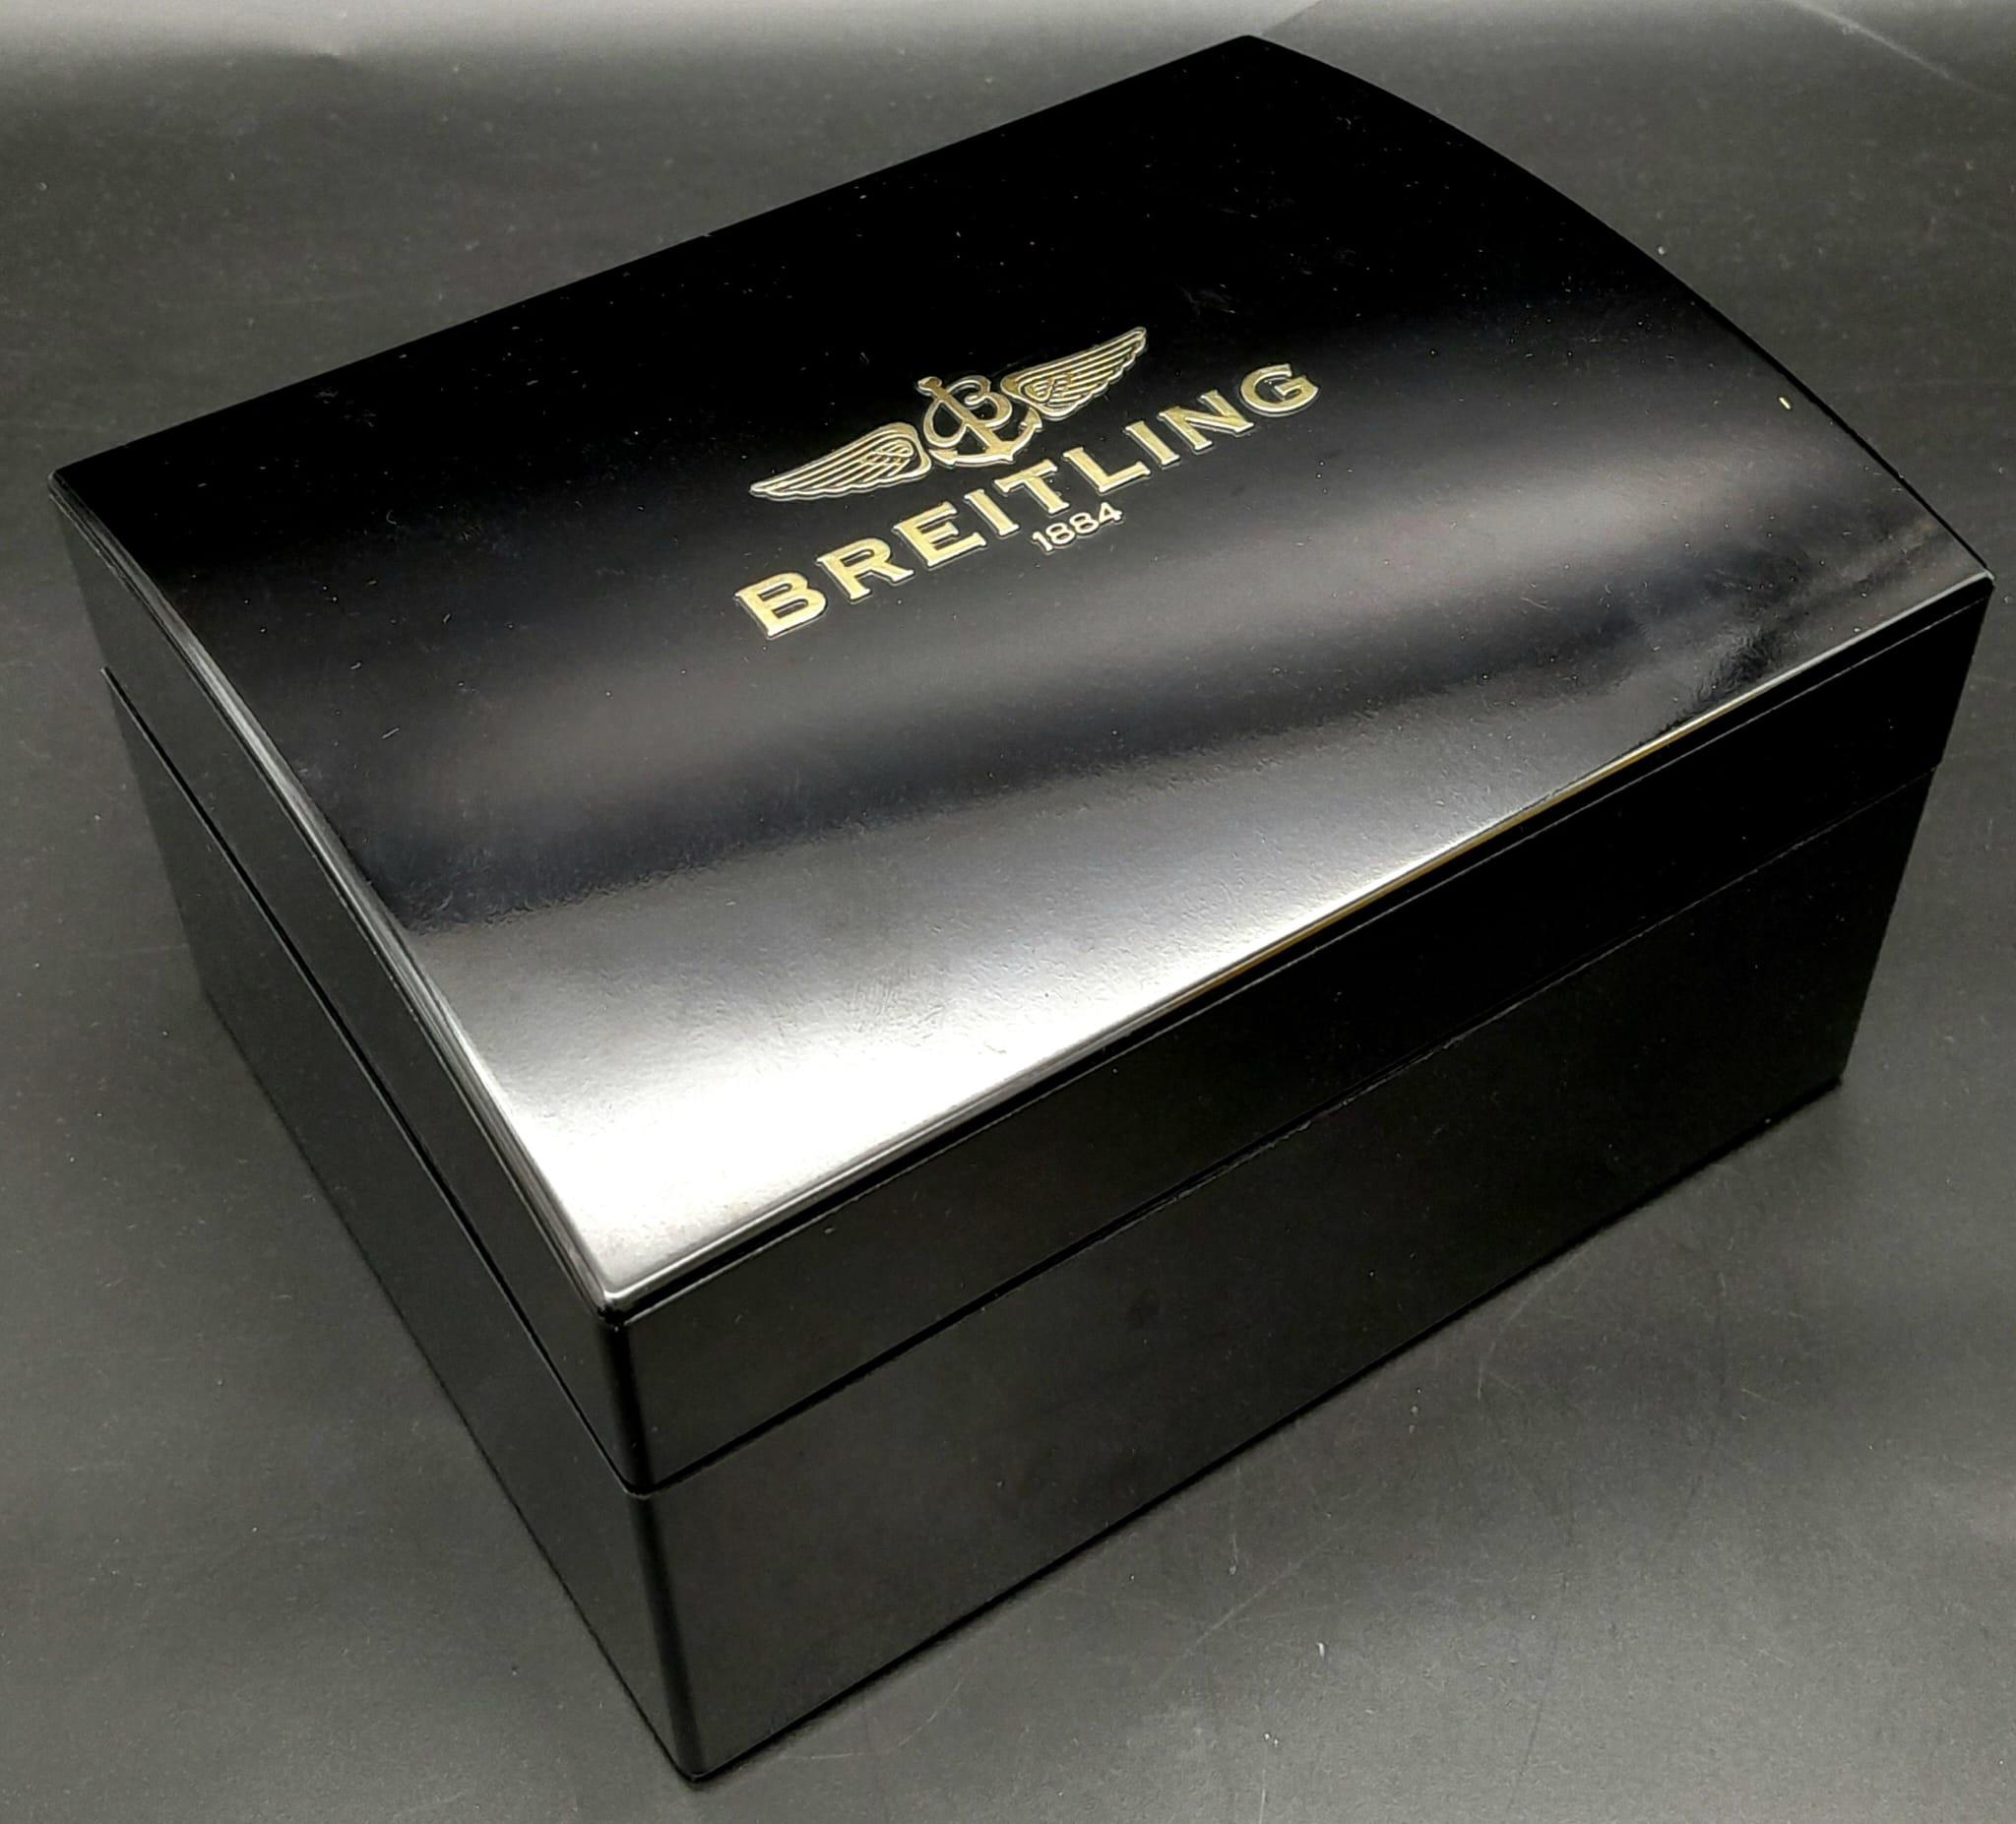 A Breitling Chronograph Automatic Gents Watch. Black leather strap. Stainless steel case - 44mm. - Image 23 of 24